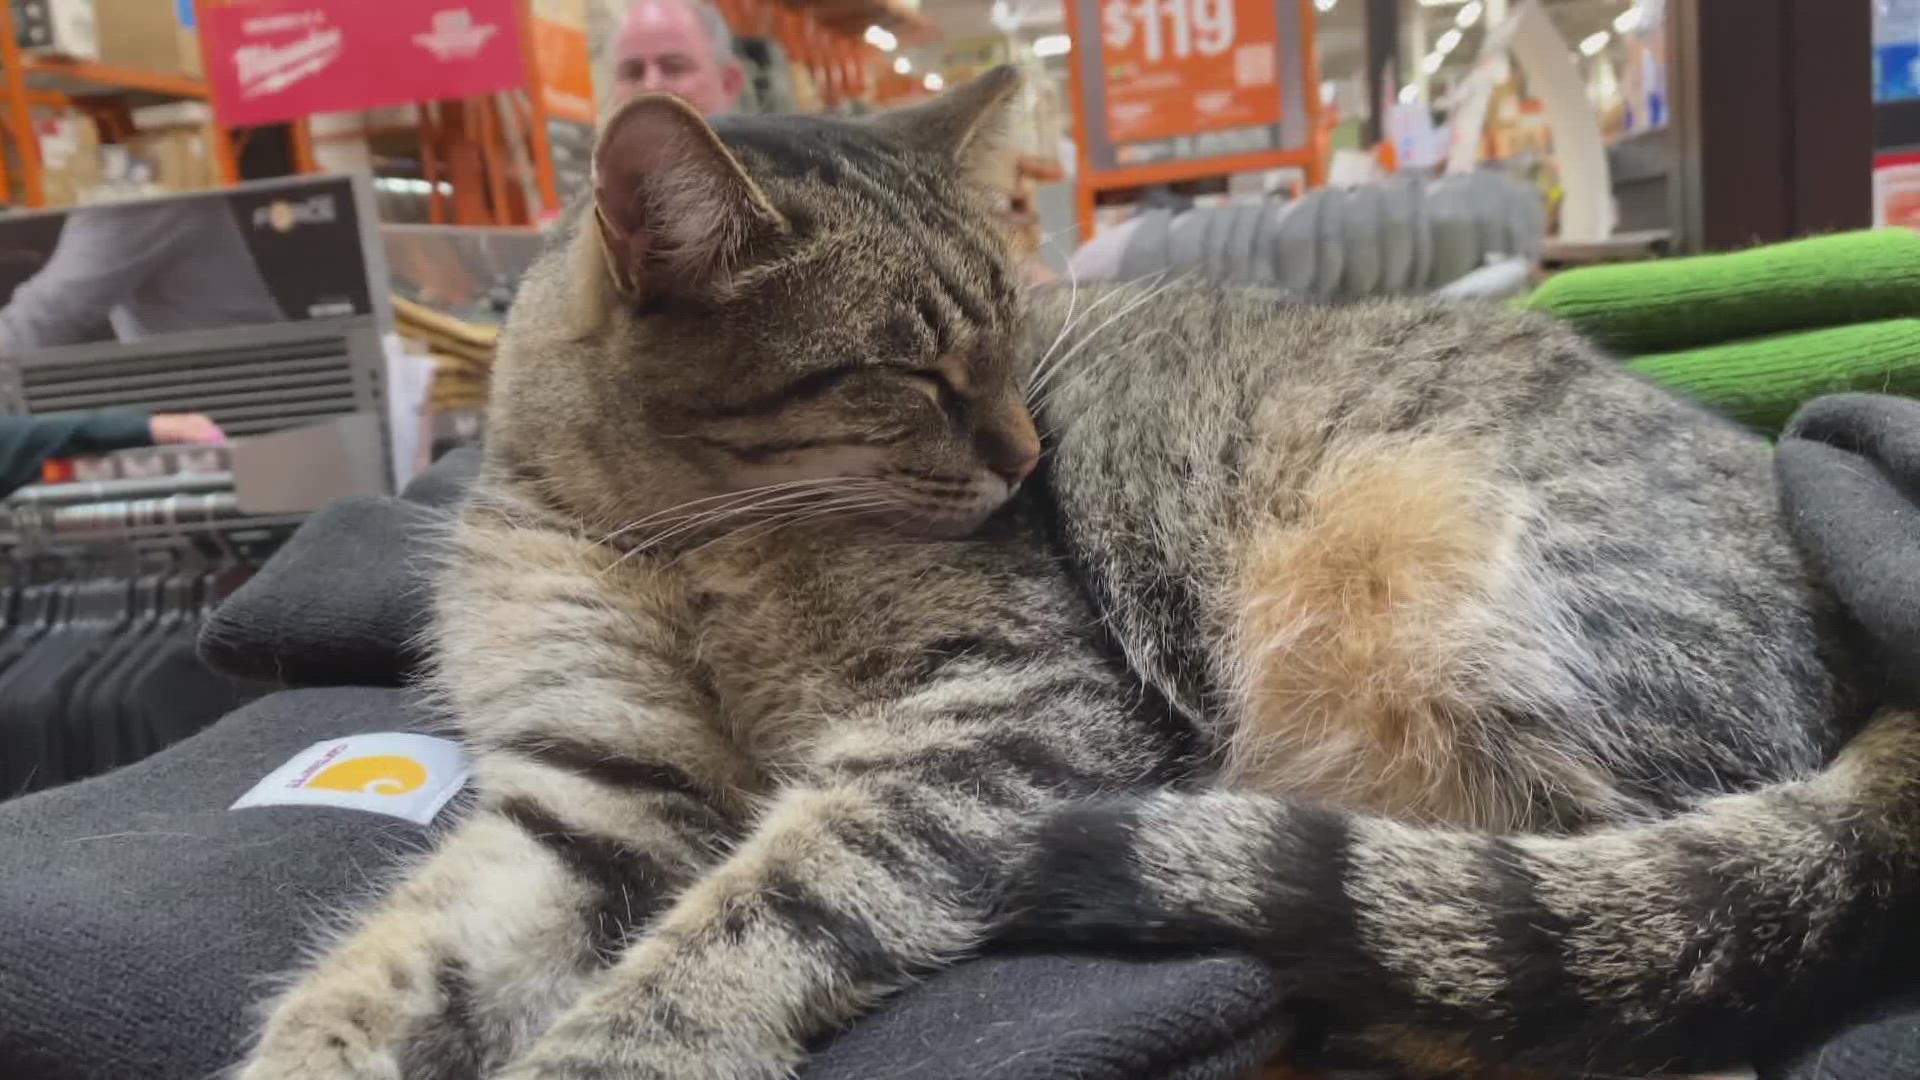 Tom 'Miss Kitty' the cat is back at the Chandler store location after reportedly being diagnosed with an upper respiratory infection.